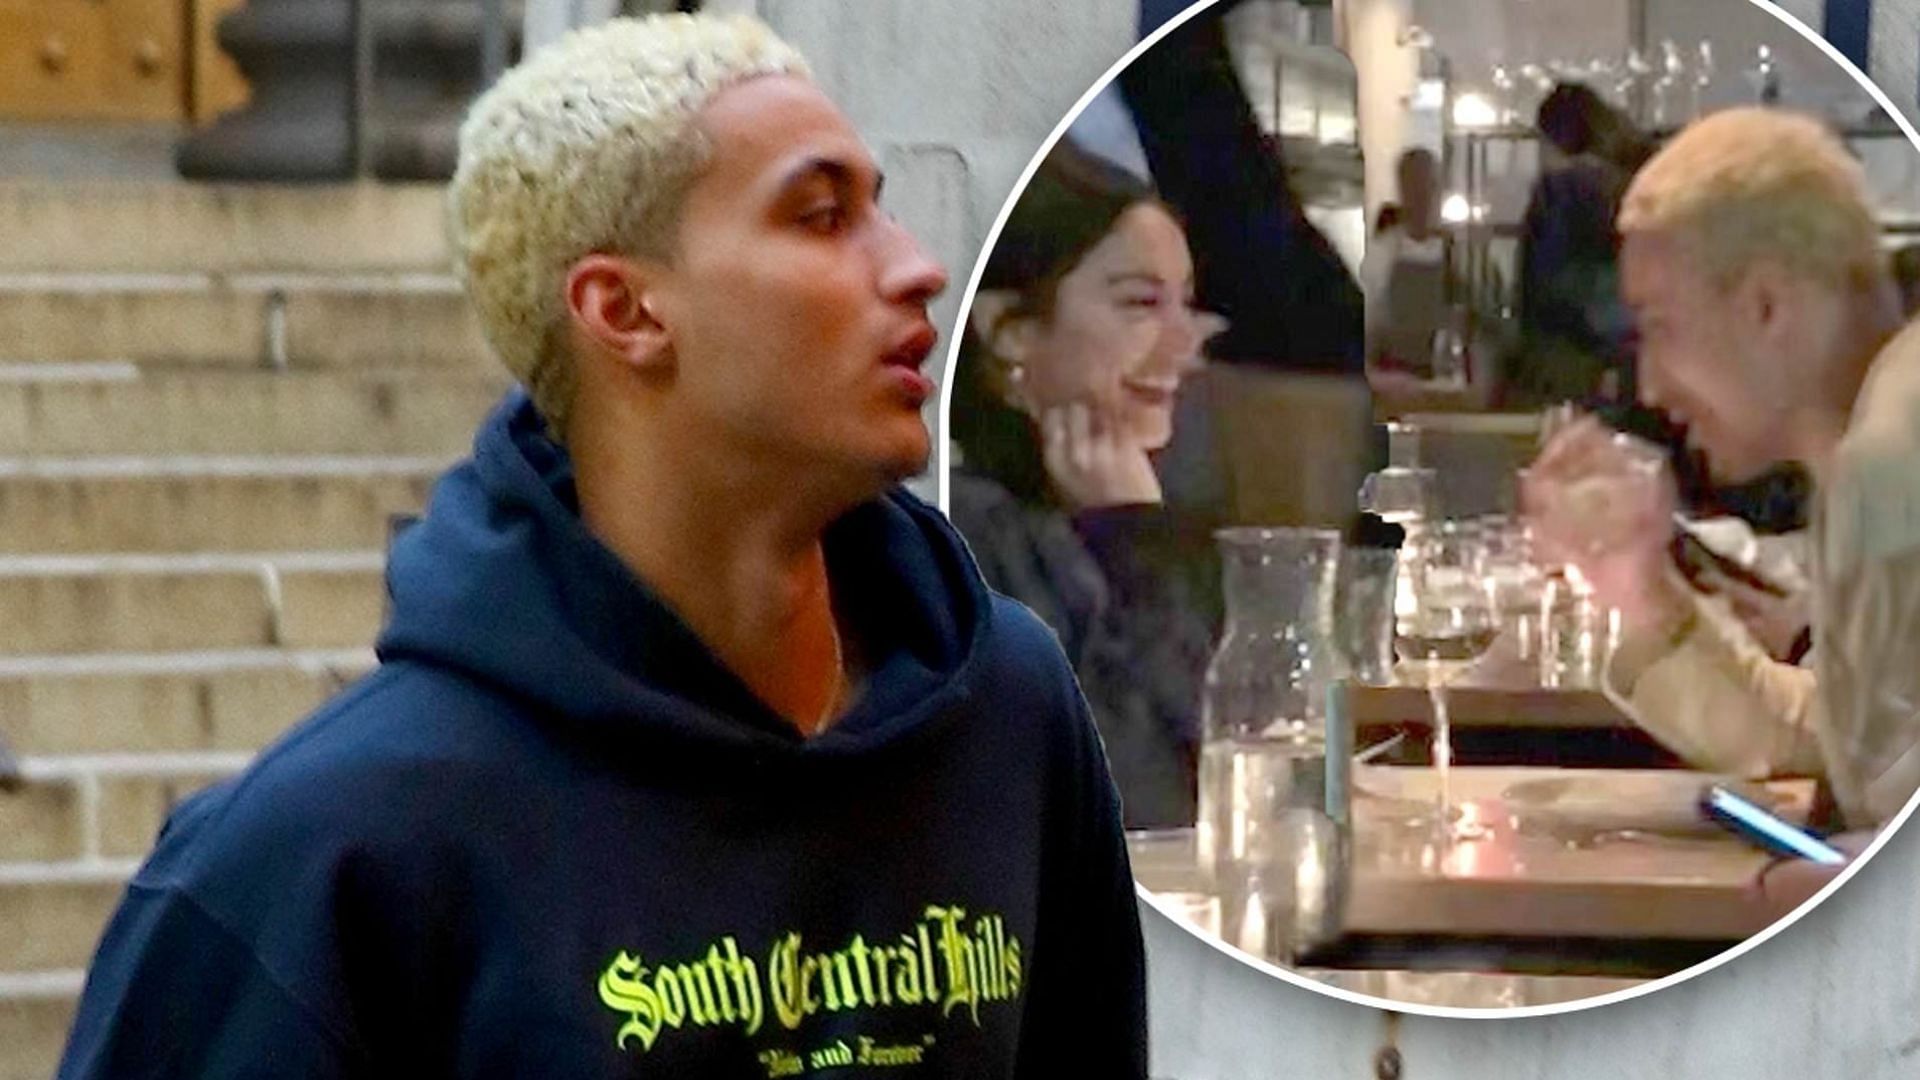 Vanessa and Kyle Kuzma spotted together in 2020 (Source: Daily Mail)